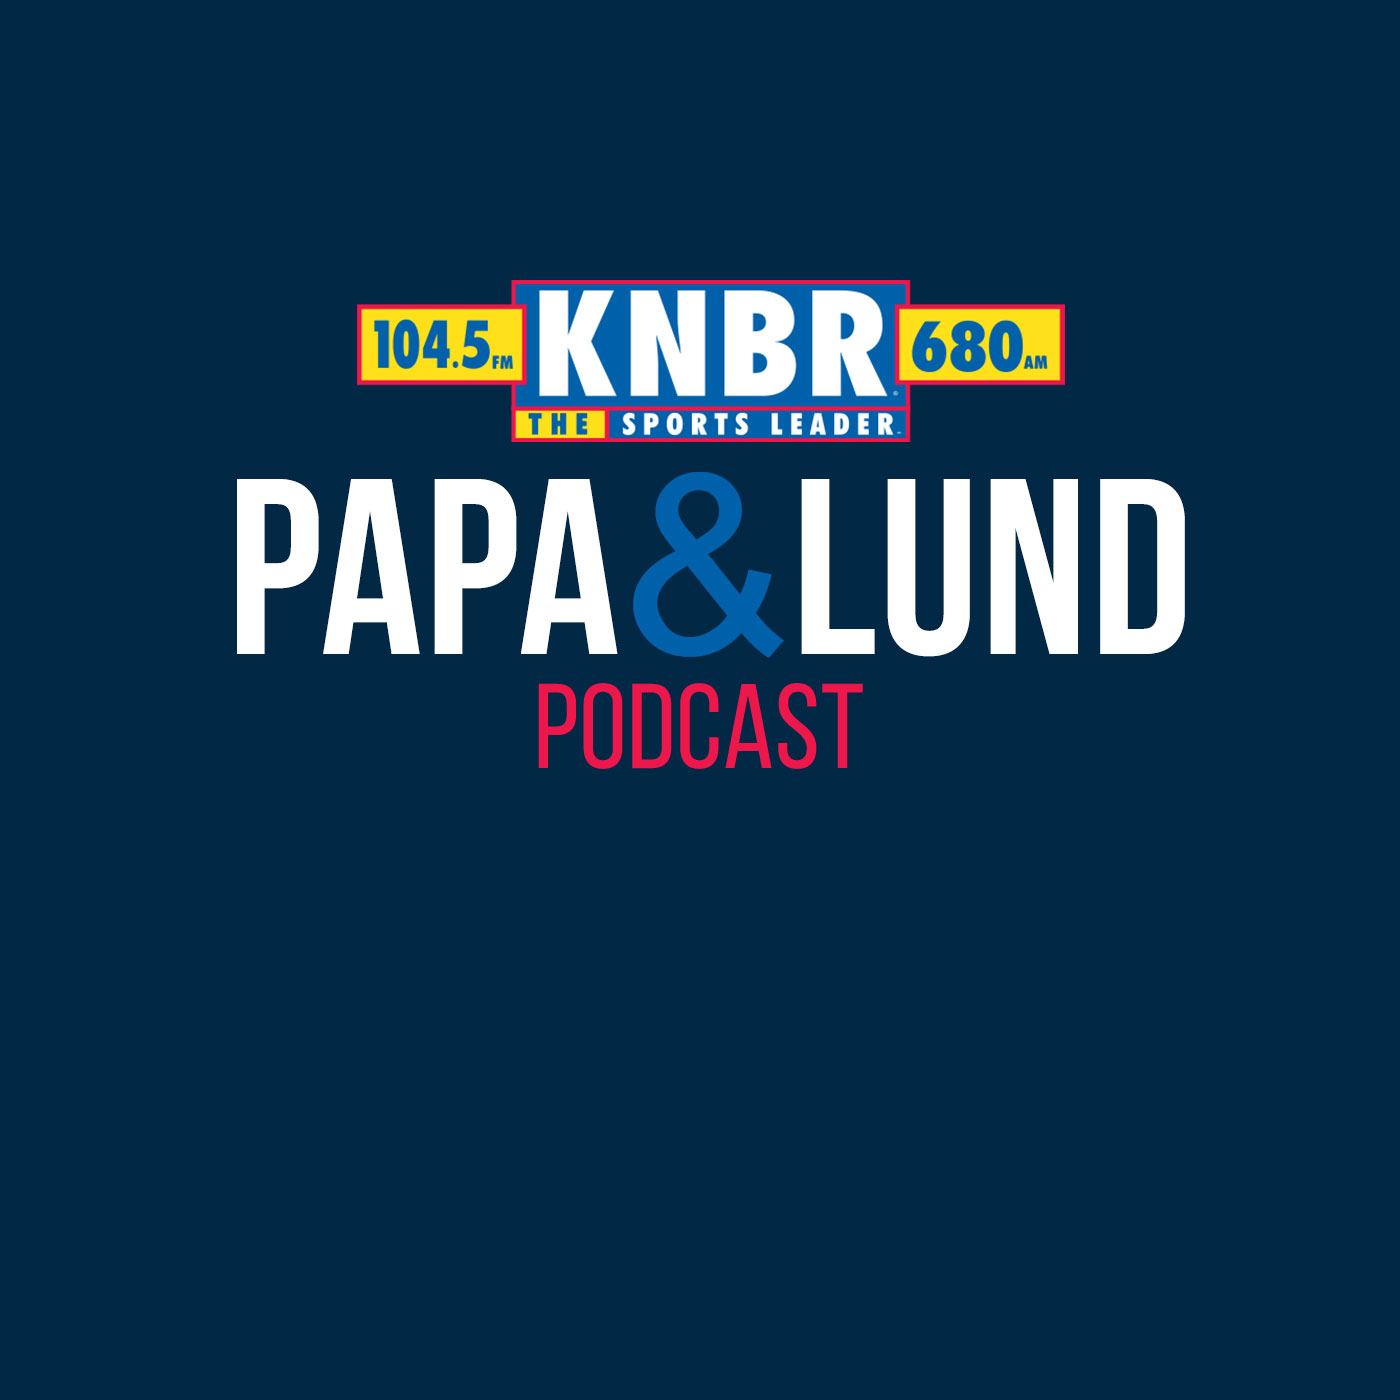 11-7 Chase Young is a 49er and Papa & Lund discuss how Kris Kocurek can elevate Chase Young's play to a new level that could make a hard decision for the 49ers next offseason